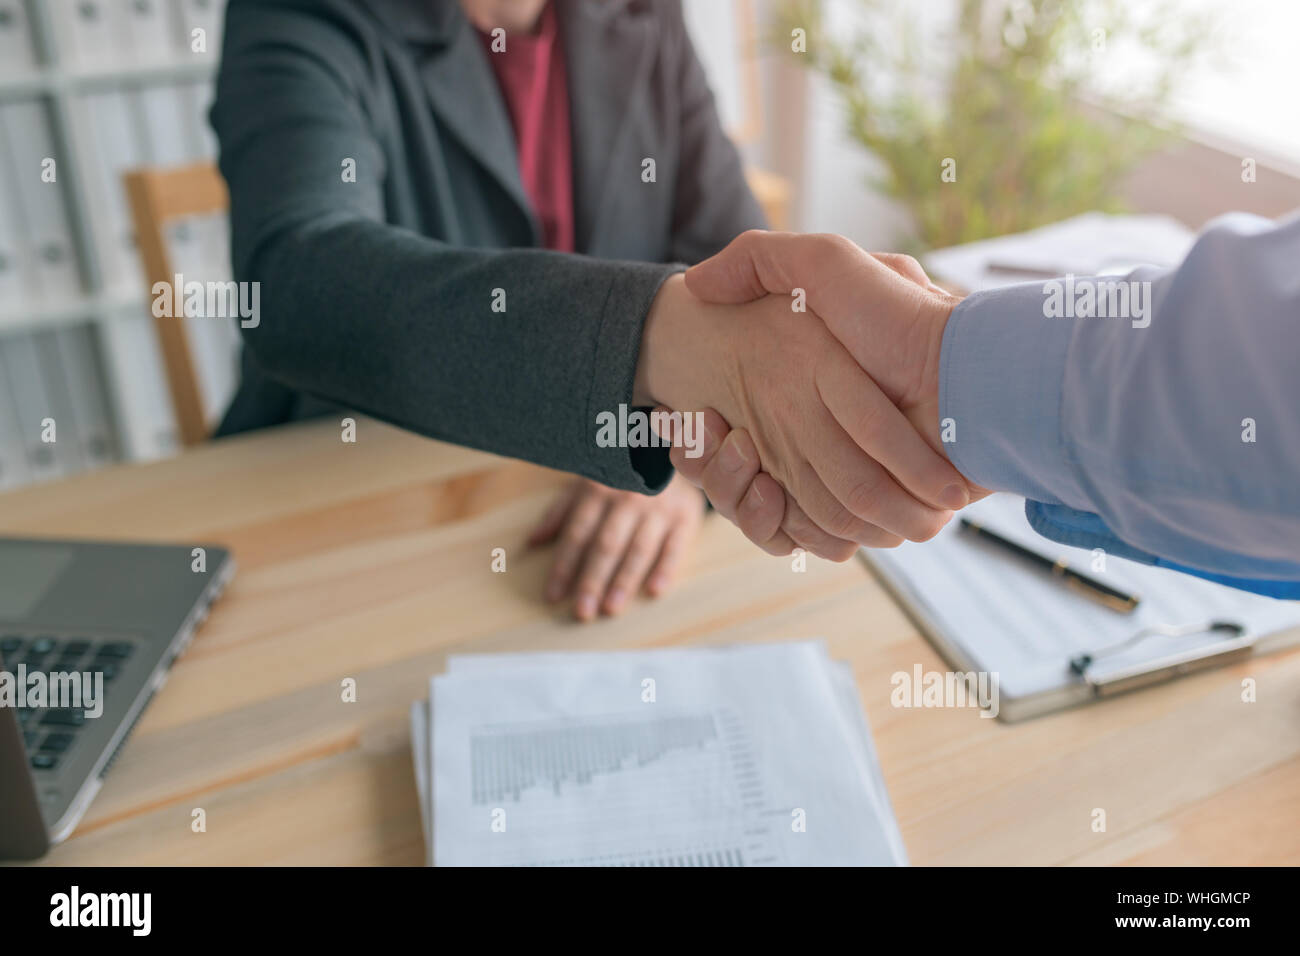 Businessman and businesswoman handshake, two business people shaking hands and greeting each other the beginning of corporate meeting in office Stock Photo